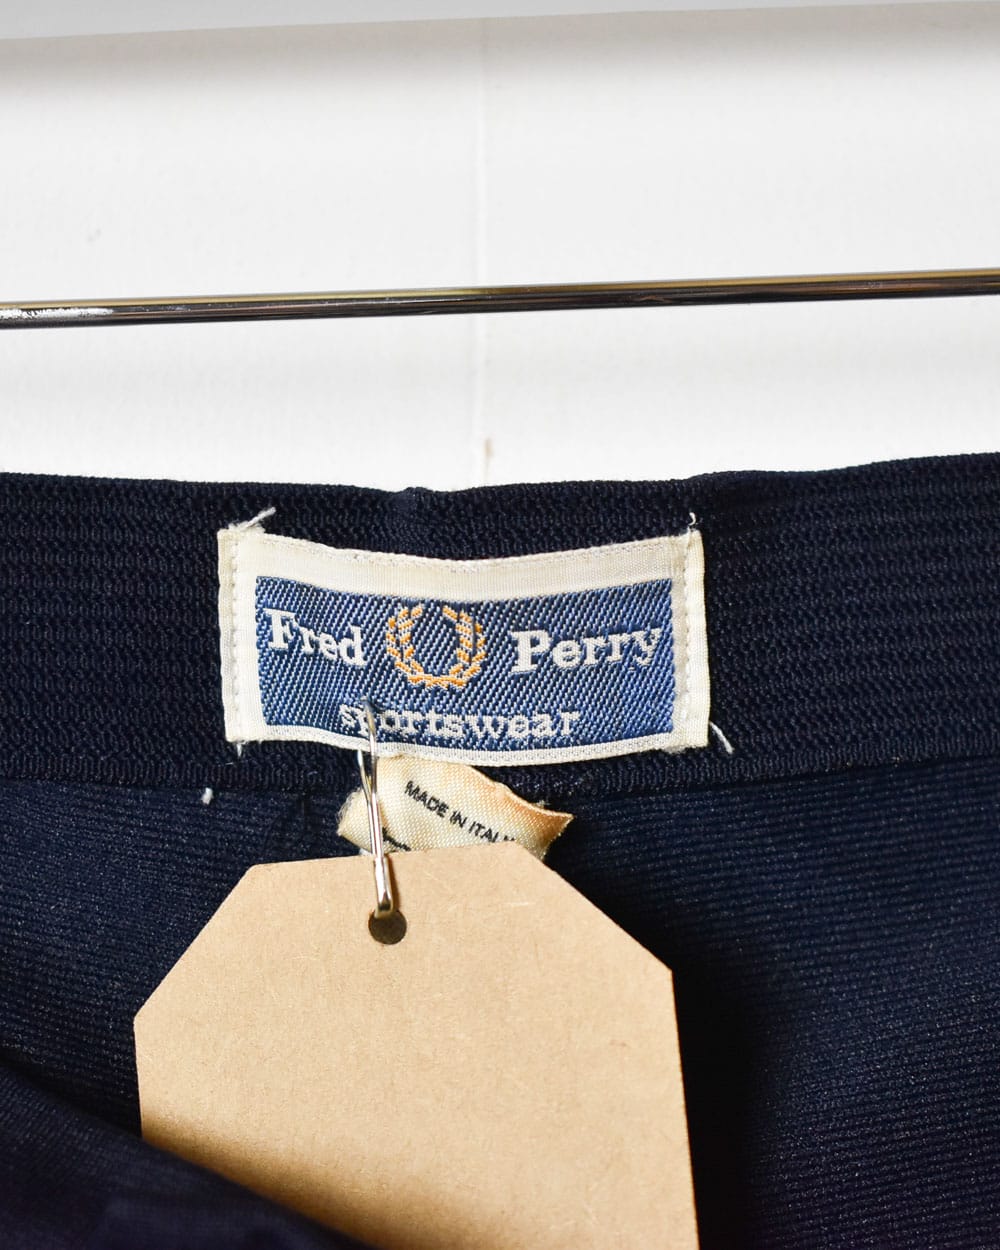 Navy Fred Perry Tennis Shorts - X-Large Women's